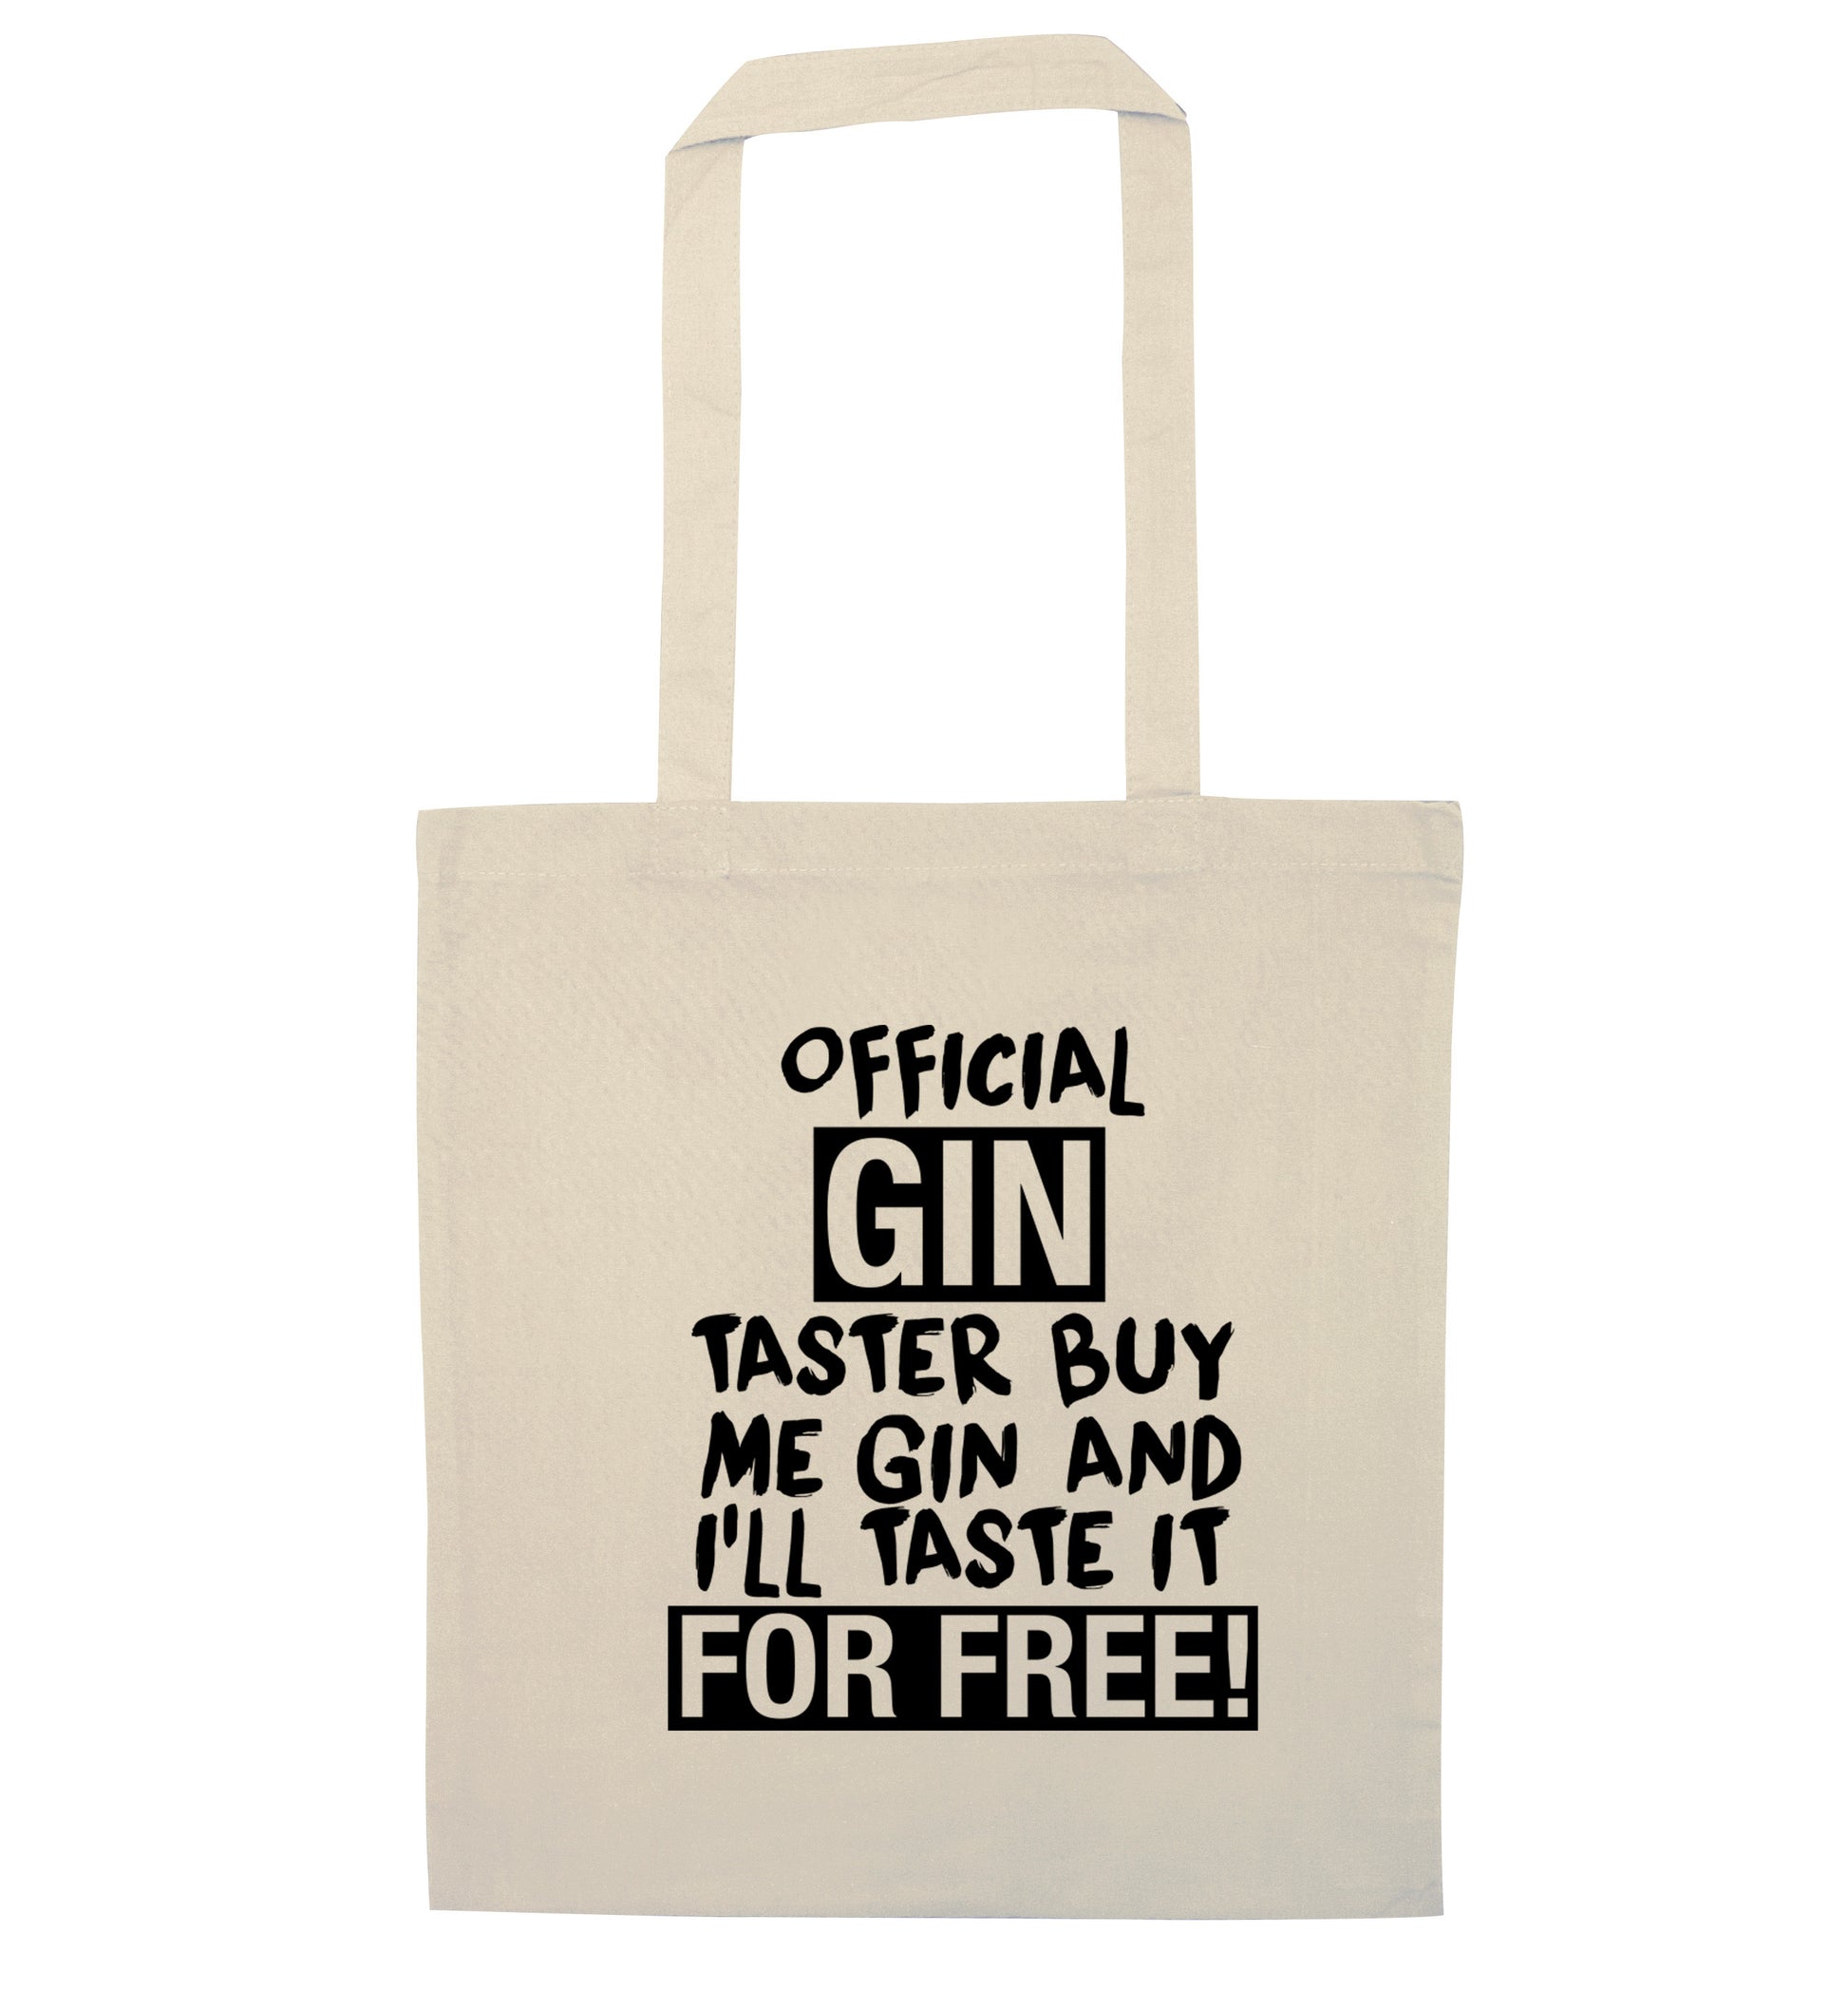 Official gin taster buy me gin and I'll taste it for free natural tote bag